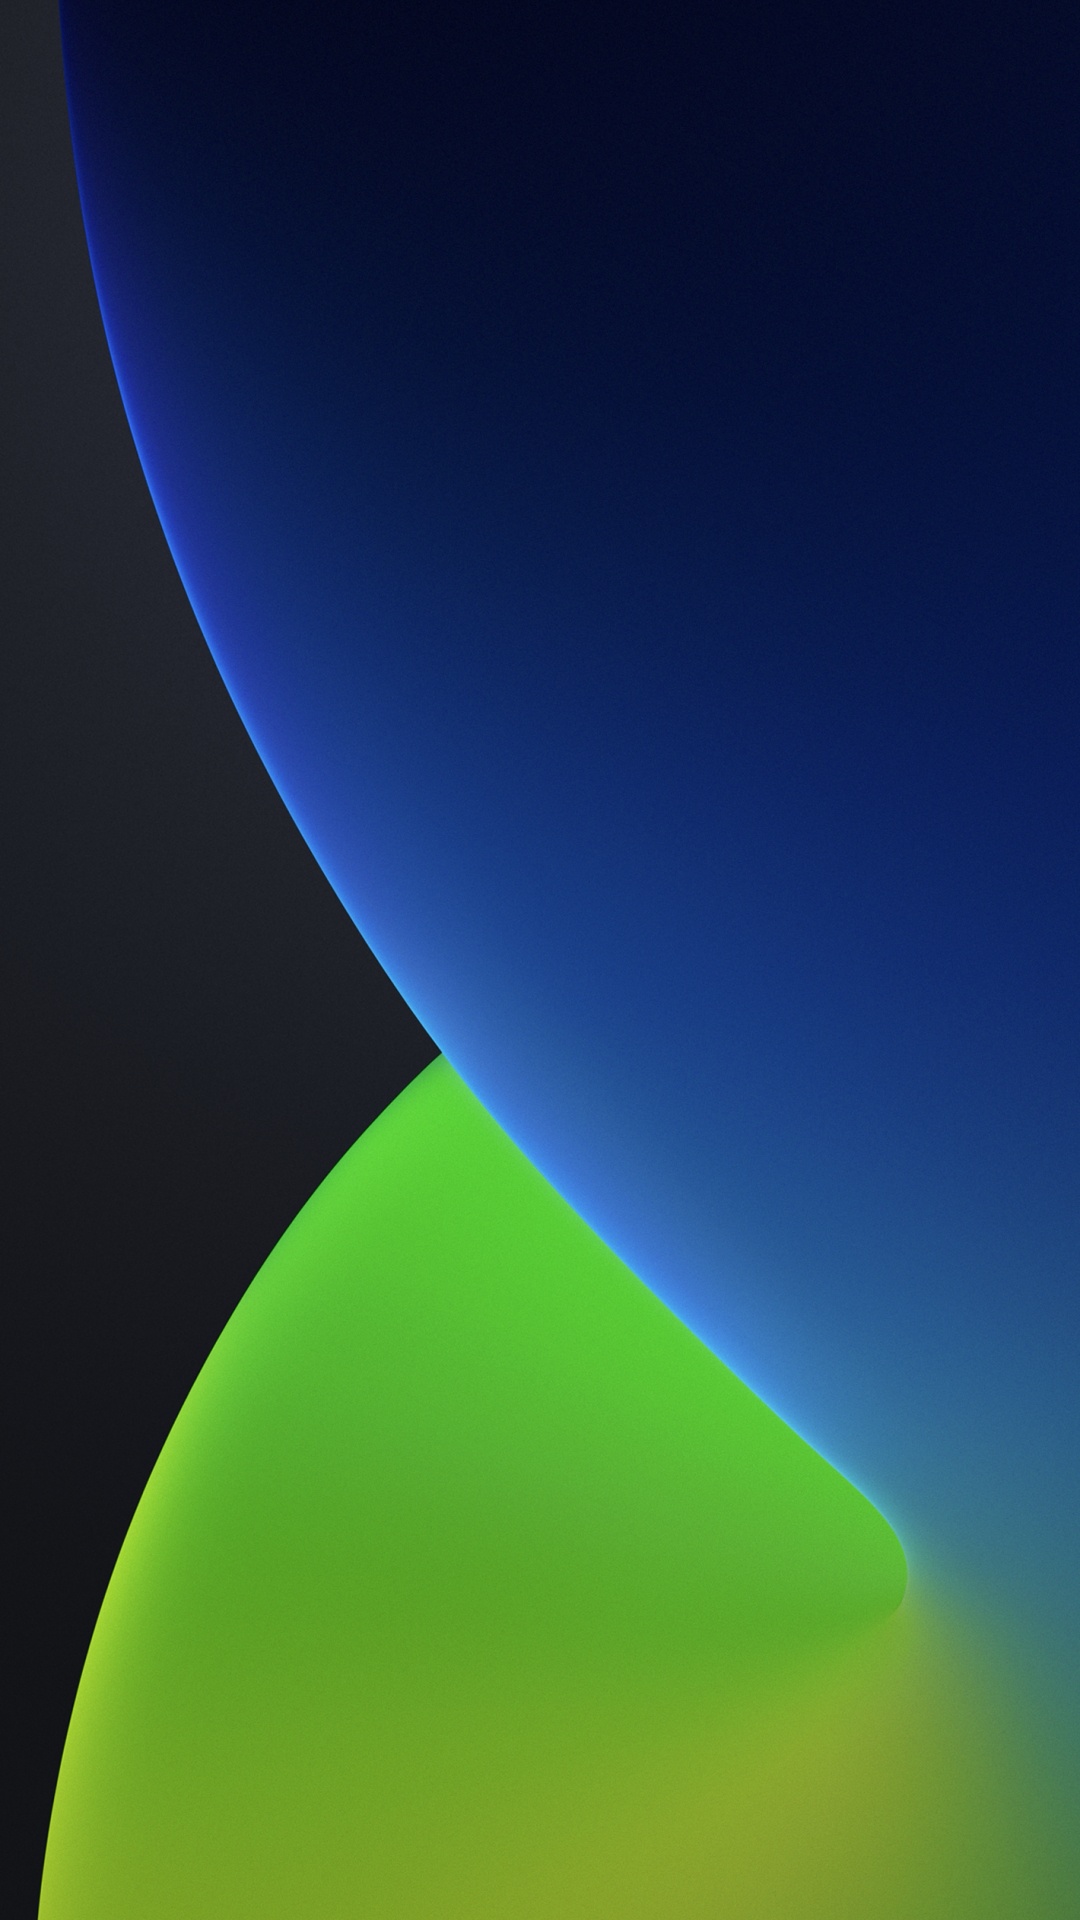 Apple, IPhone, WWDC 2020, Apples, IOS 14. Wallpaper in 1080x1920 Resolution